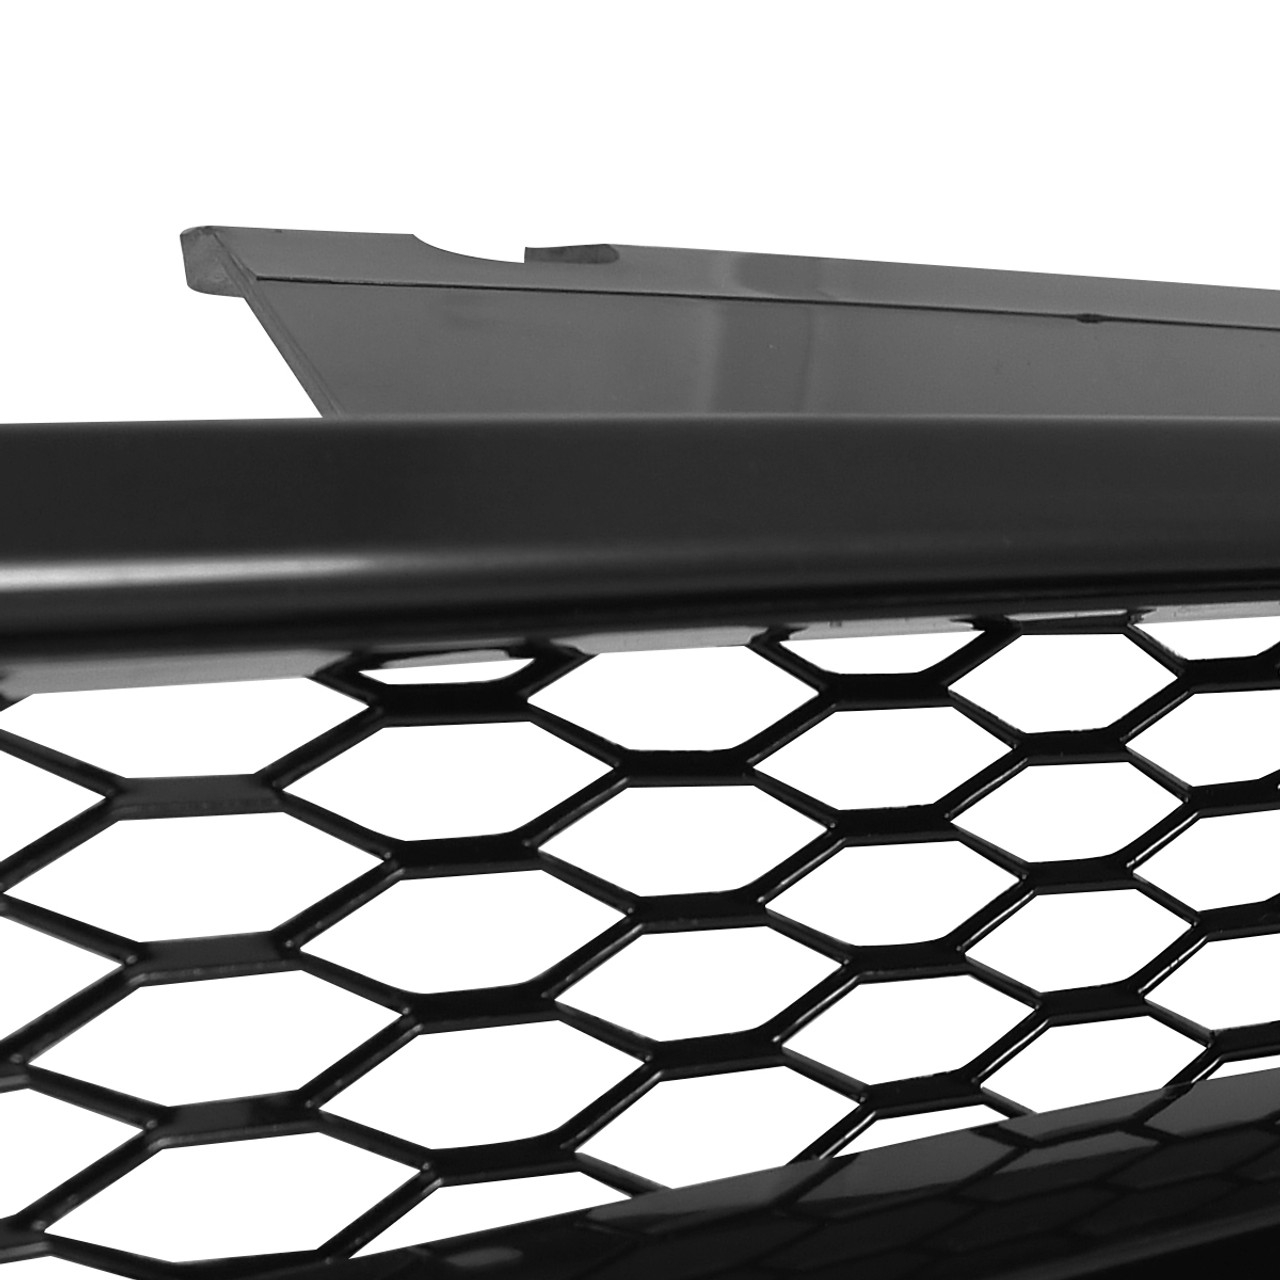 1996-1998 Honda Civic TR Style Black ABS Mesh Grille - Spec-D Tuning